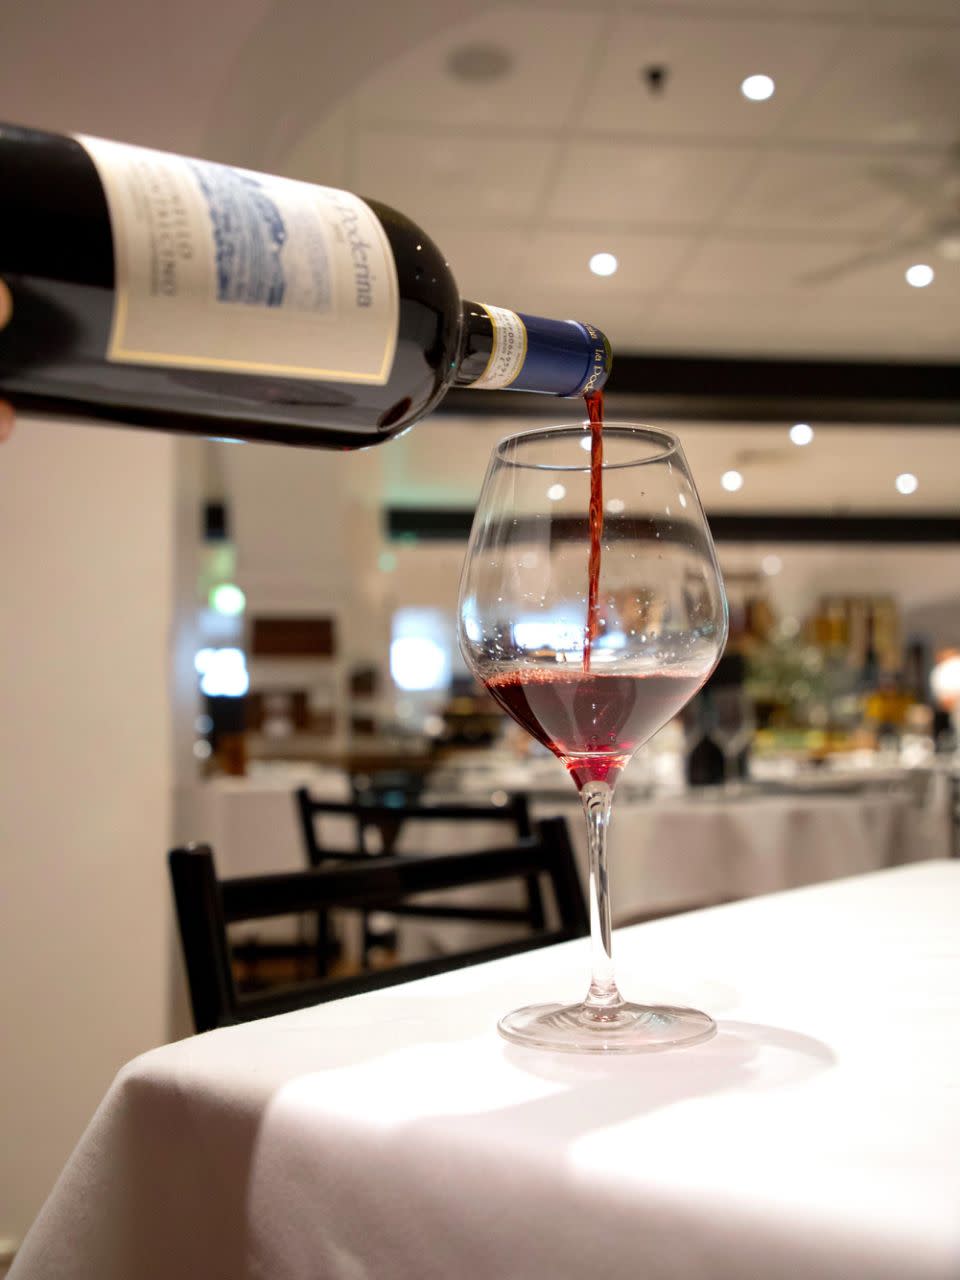 Machiavelli's Sommelier Simone hand picks wine to go with your meal. Photo: Machiavelli